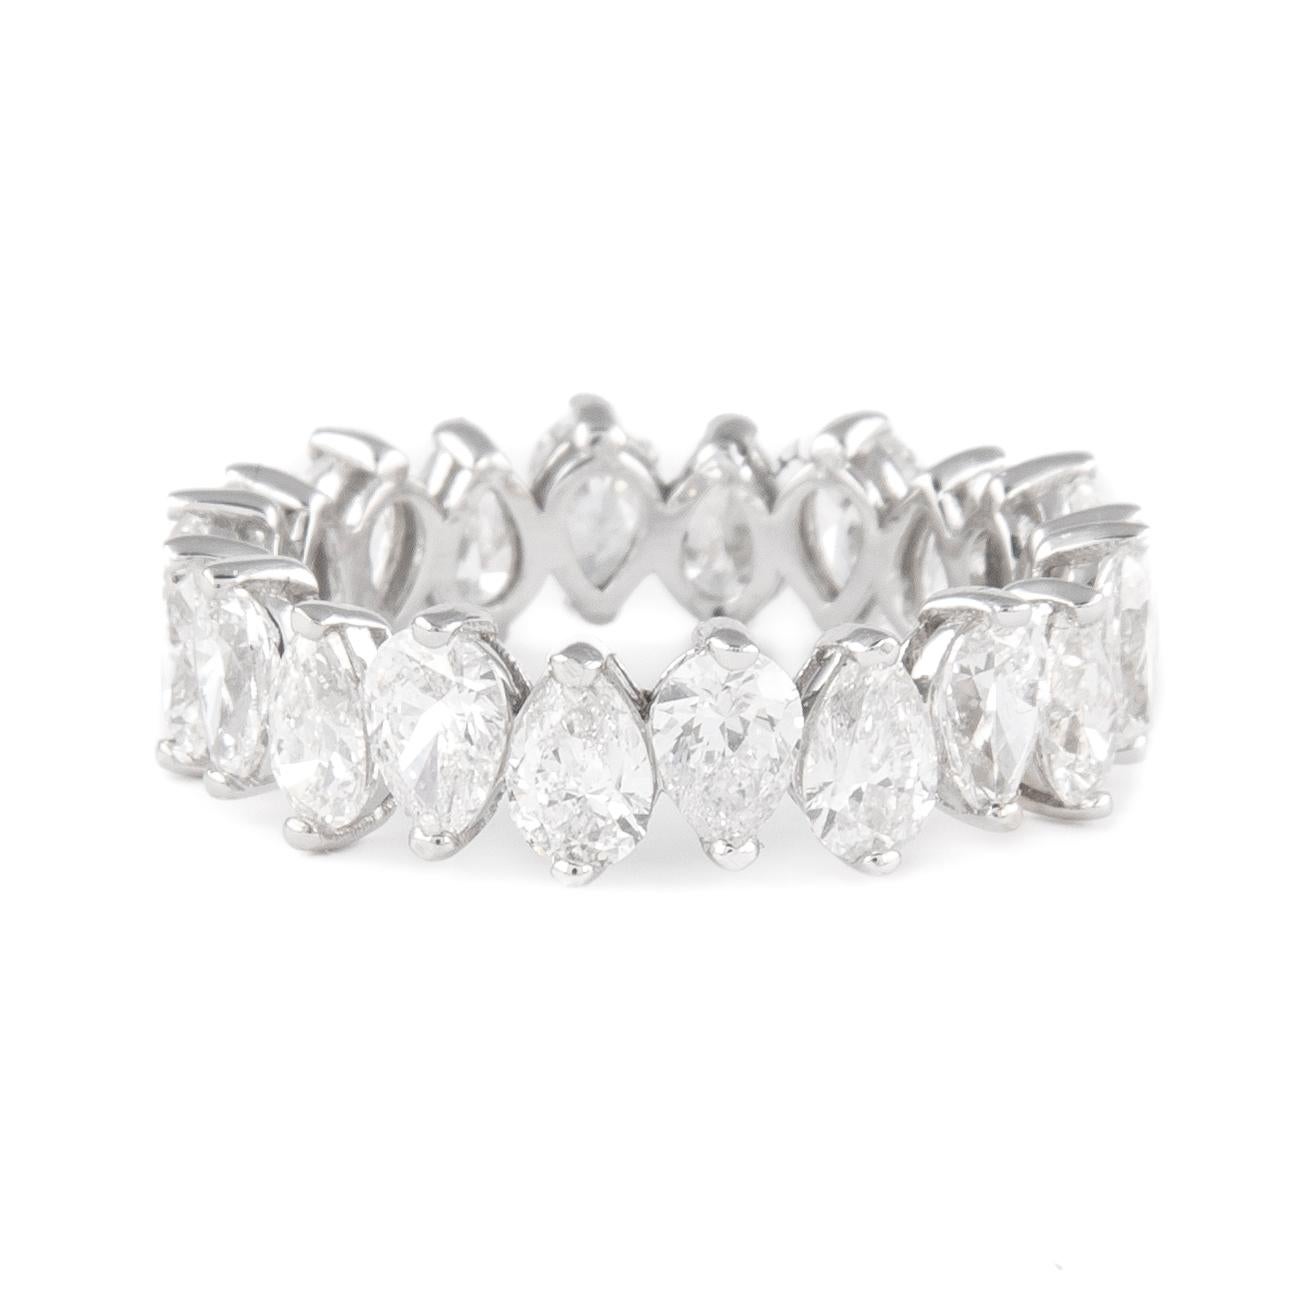 Stunning pear shape diamond eternity band, alternating, By Alexander Beverly Hills.
20 heart brilliant diamonds, 3.73 carats. F/G color and VS clarity. Set in 18k white gold, 2.99 grams, size 6. 
Accommodated with an up to date appraisal by a GIA